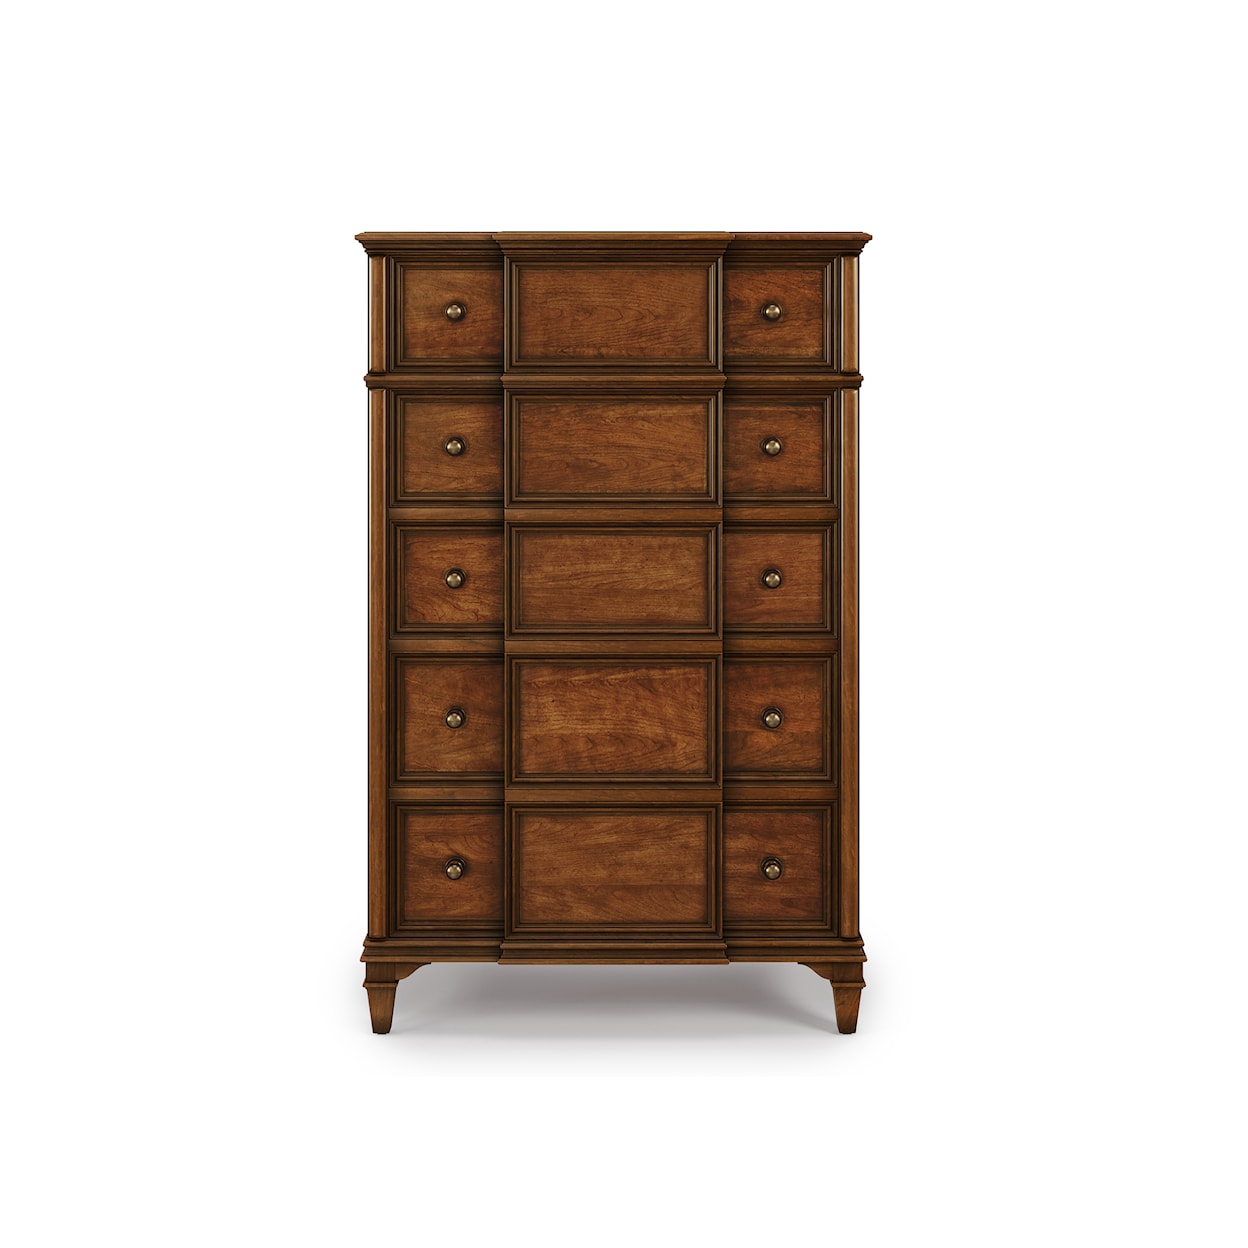 A.R.T. Furniture Inc Newel Drawer Chest - Five Drawers 